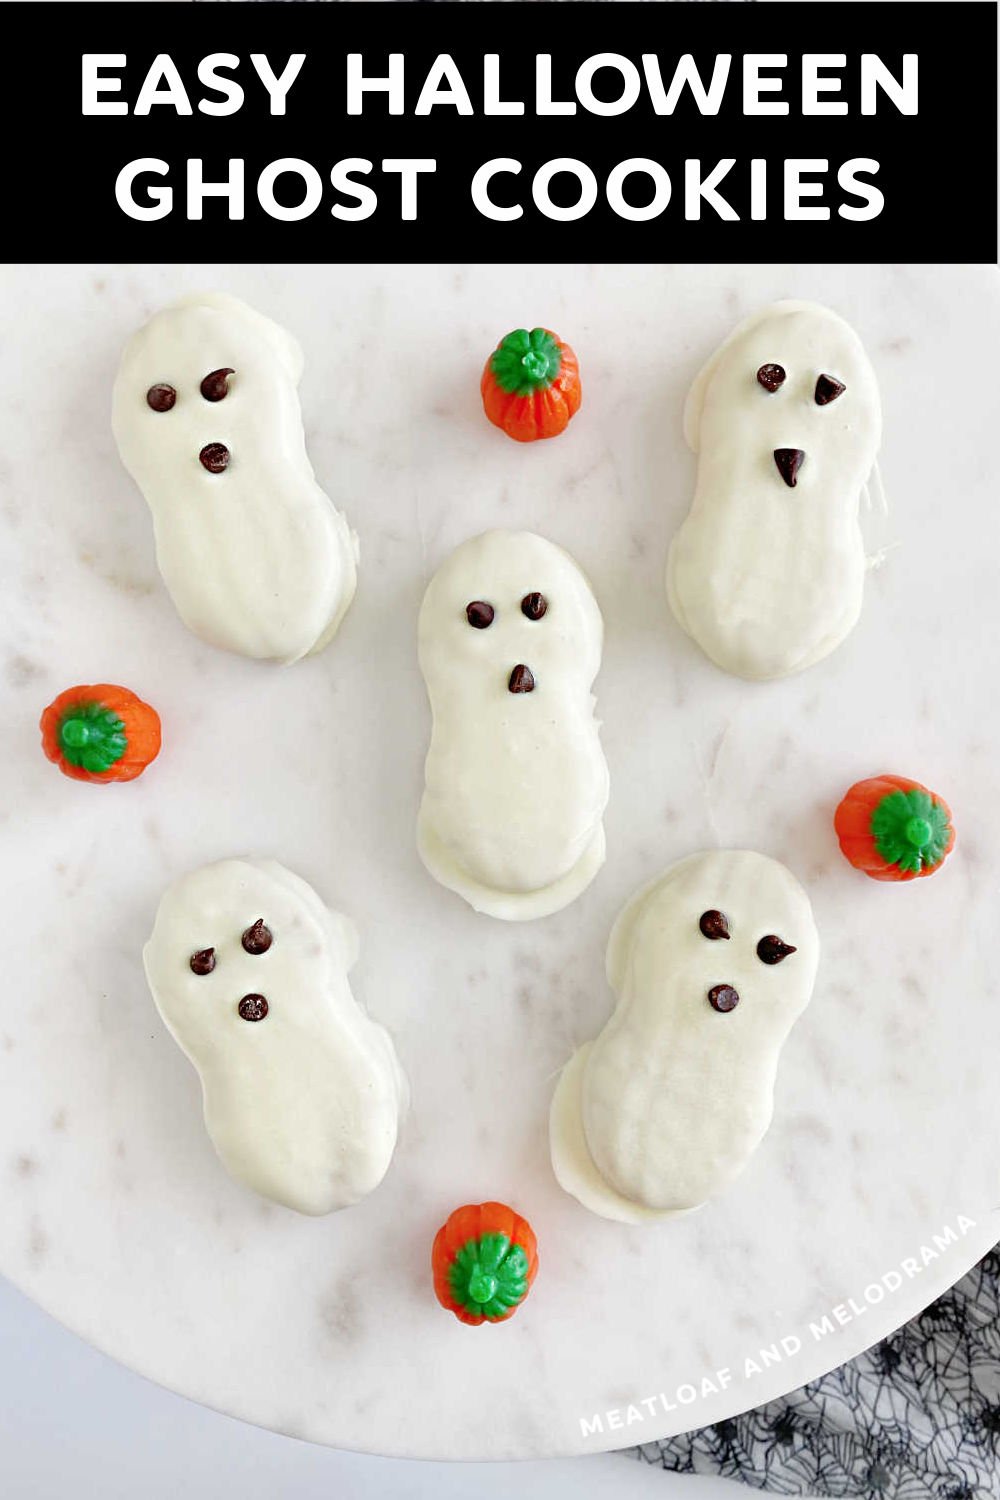 Nutter Butter Halloween Ghost Cookies made with 3 ingredients are super cute Halloween treats. Perfect Halloween party food even kids can make and fun for the whole family! via @meamel